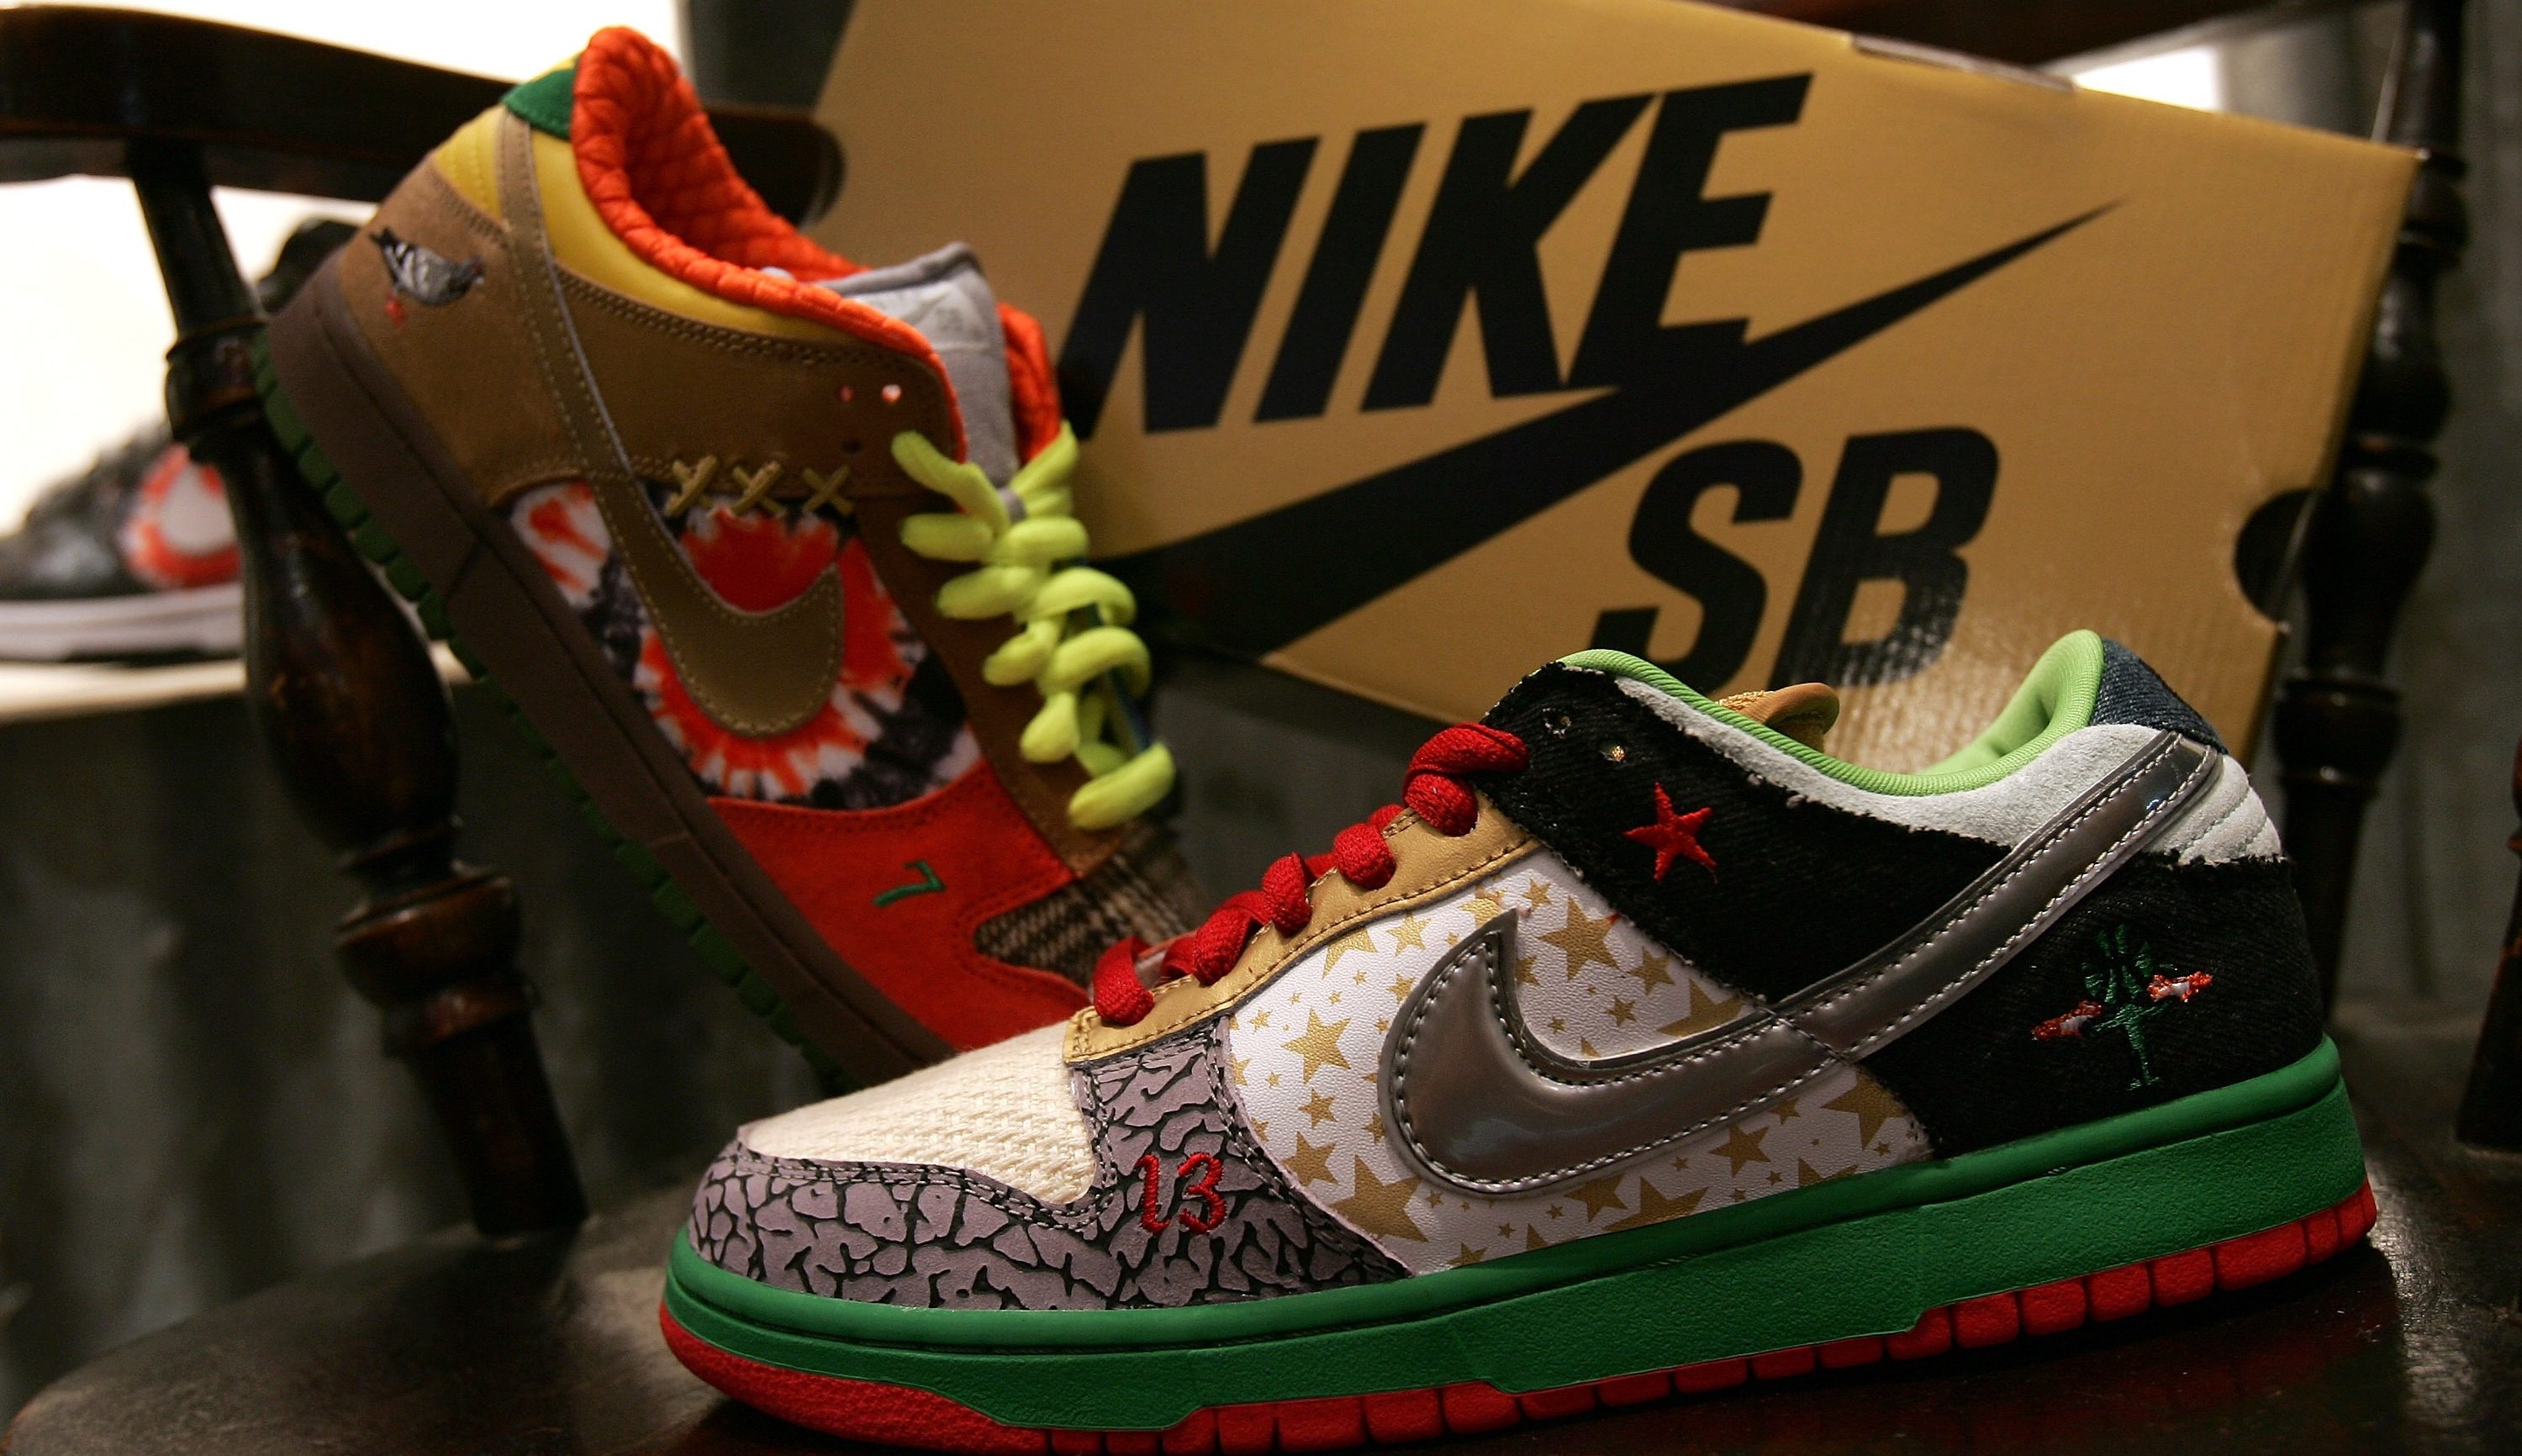 How and why Nike has relaunched the Dunks